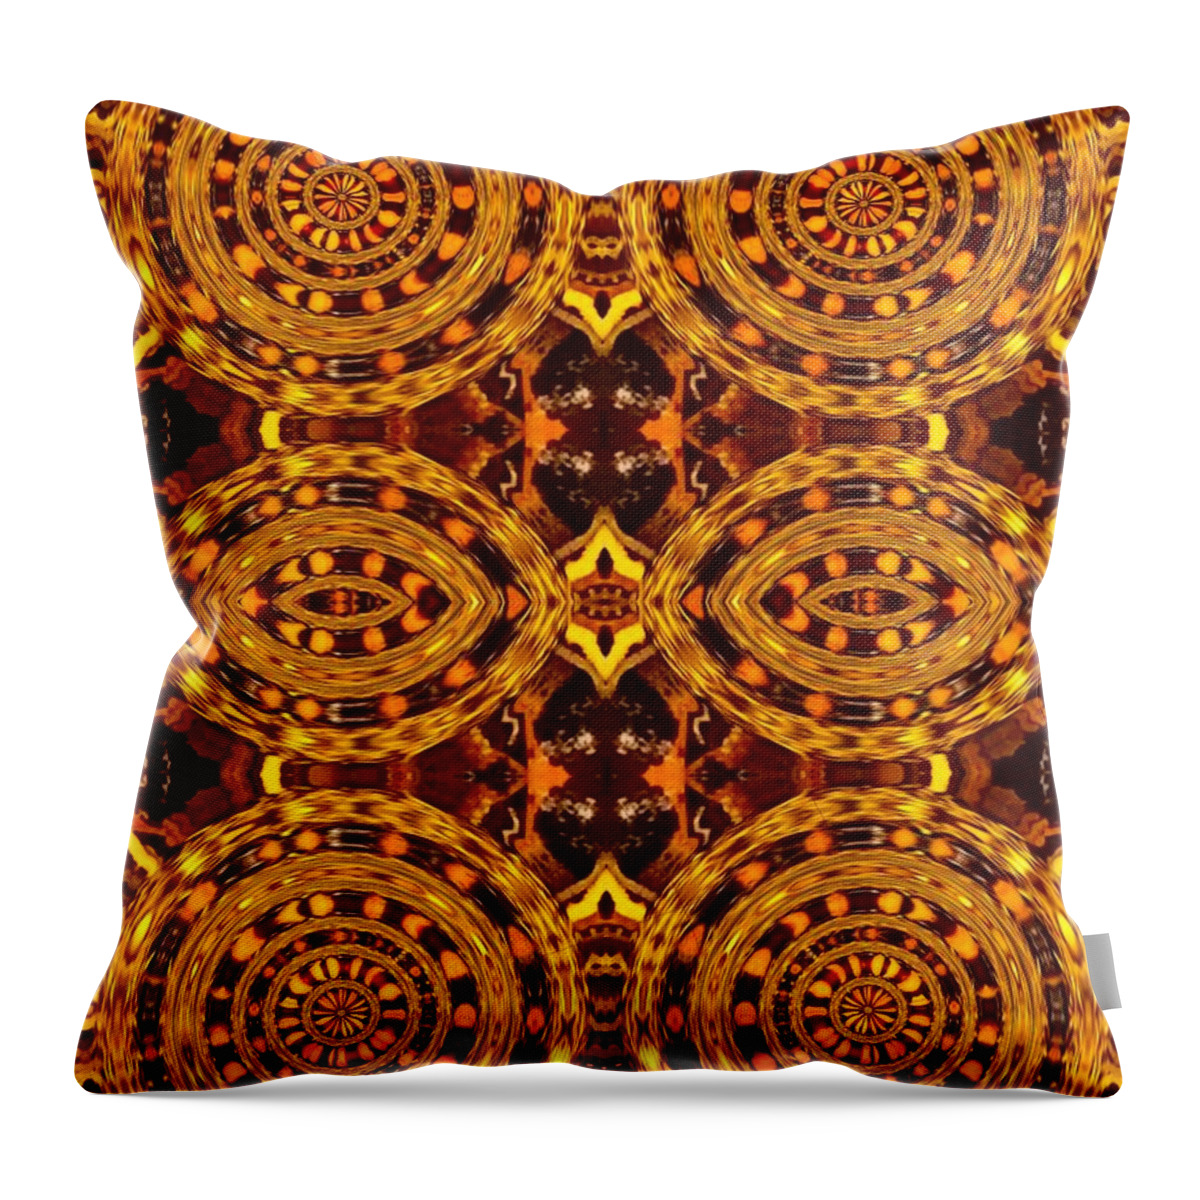 Yellow Throw Pillow featuring the digital art Bumble Bee Flight by Standing Crow